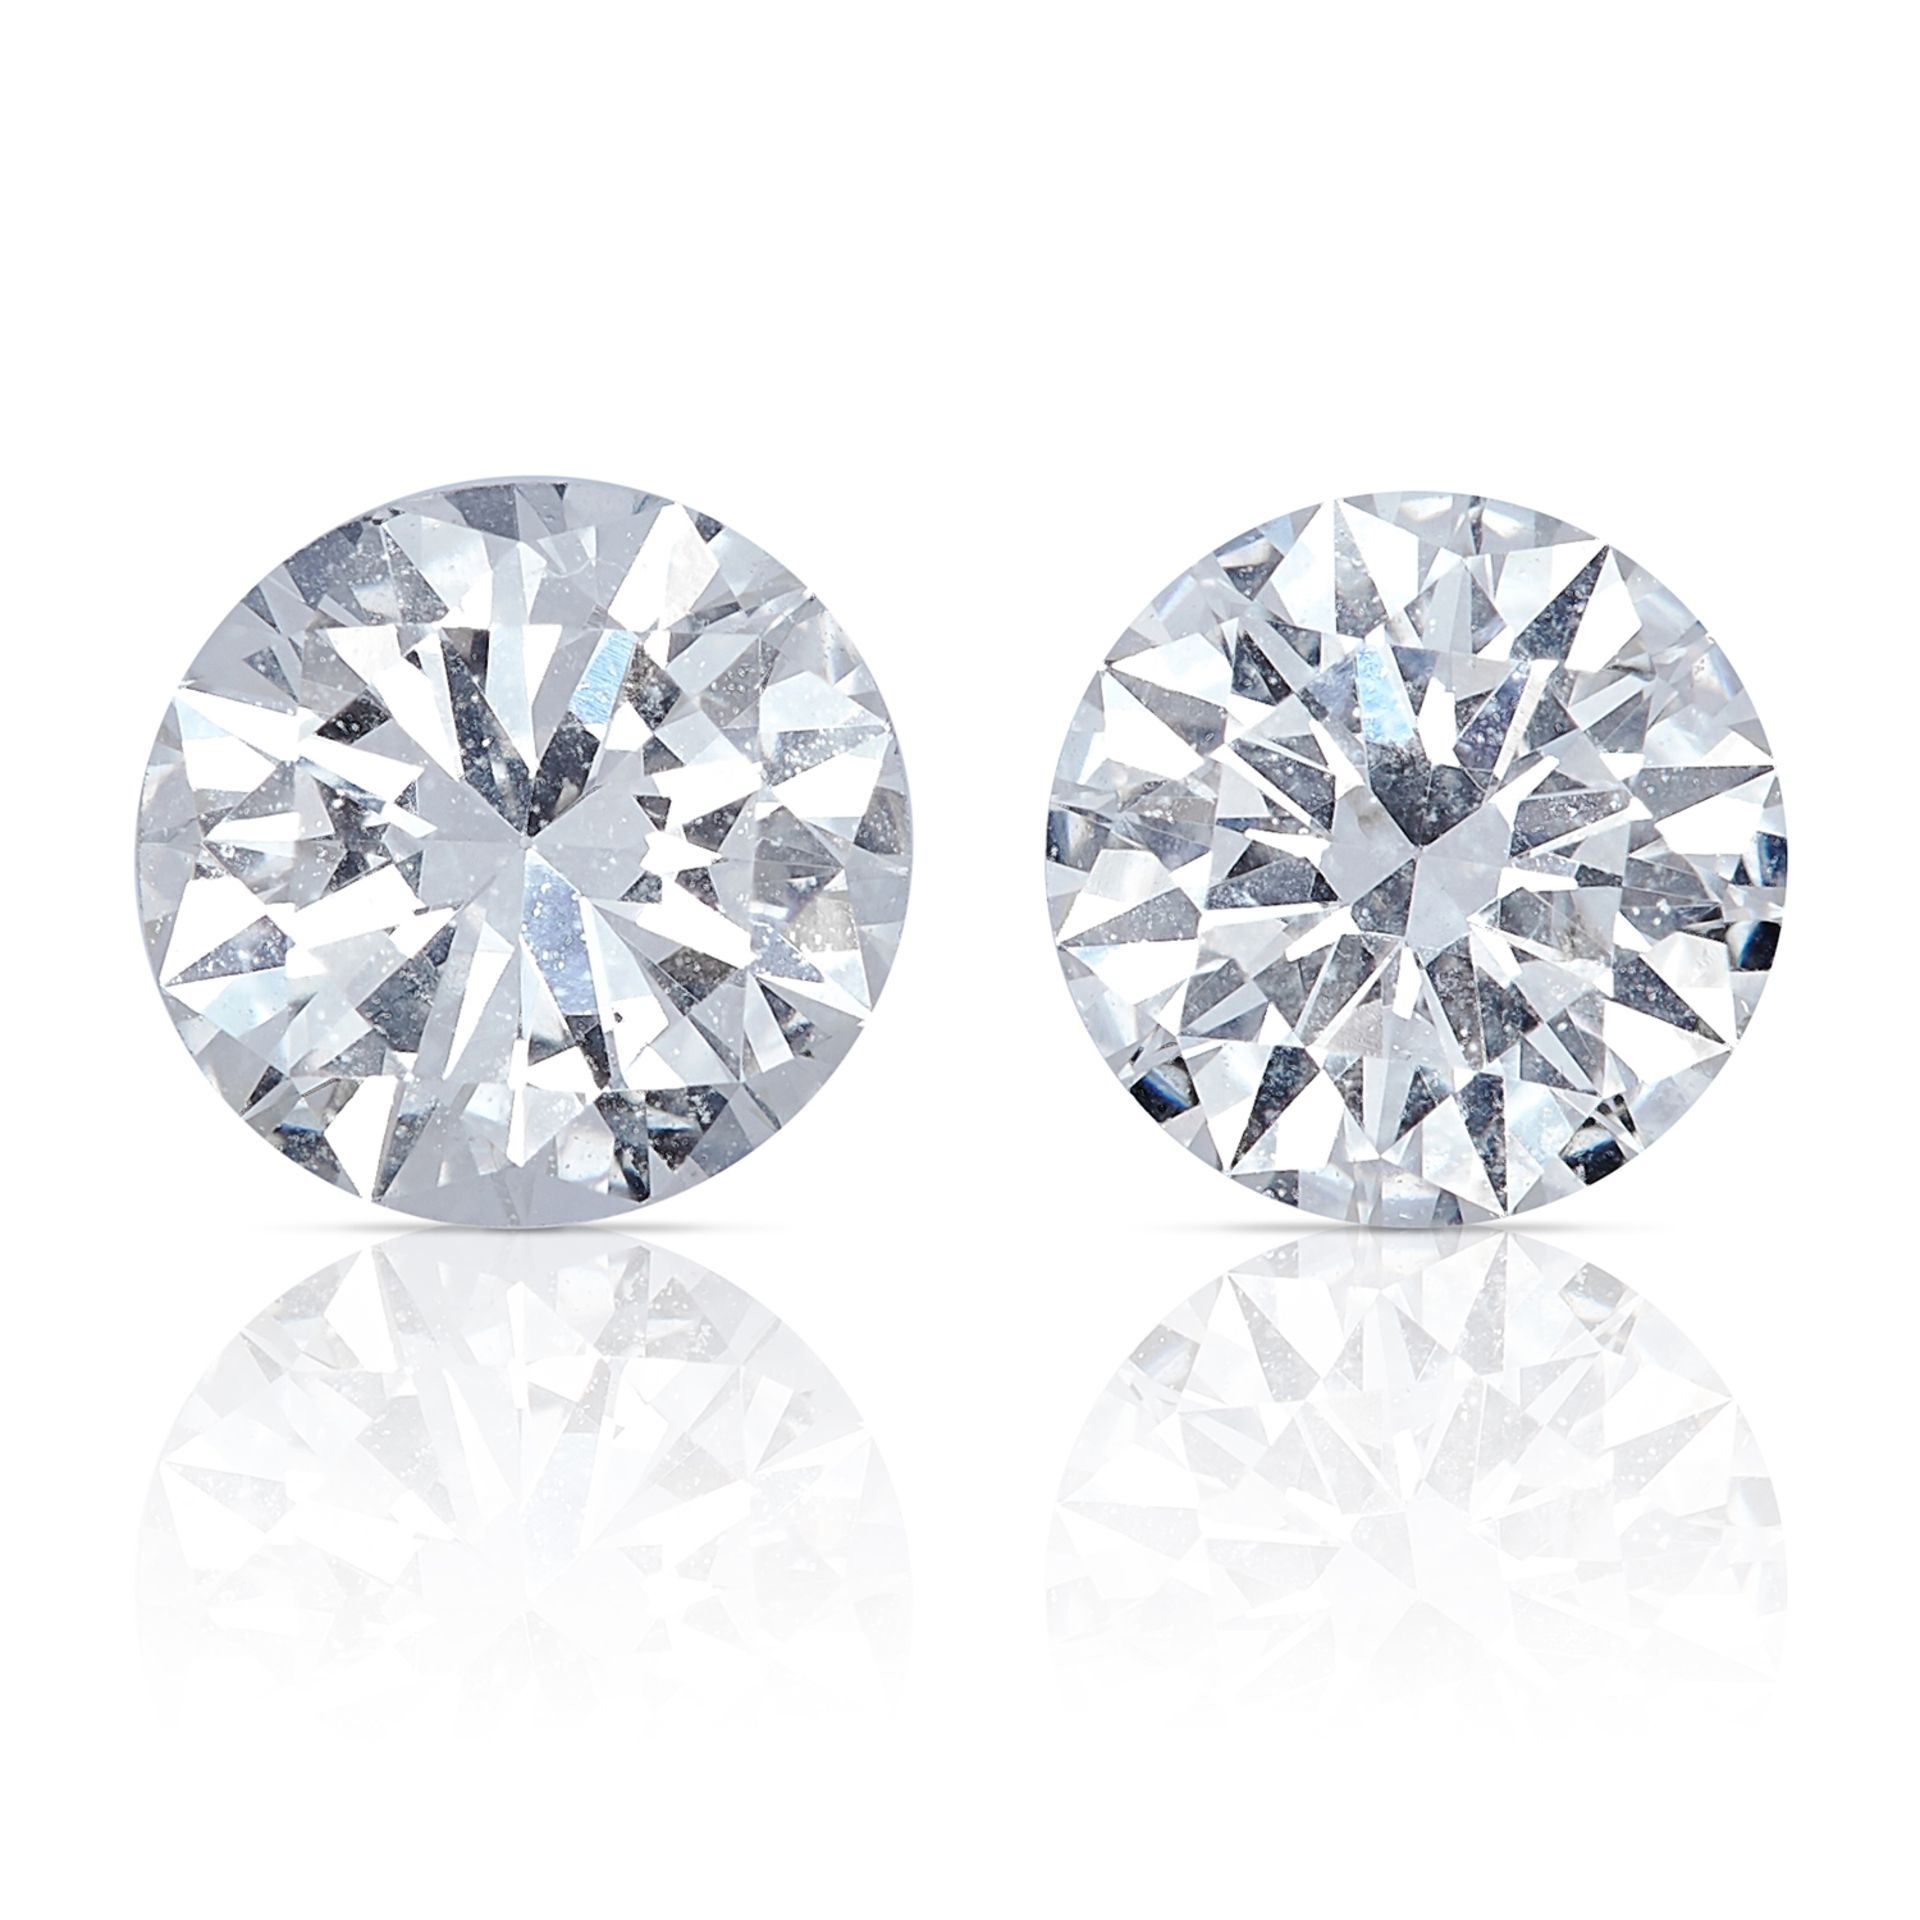 TWO ROUND CUT MODERN BRILLIANT DIAMONDS, TOTALLING 0.71cts, UNMOUNTED.